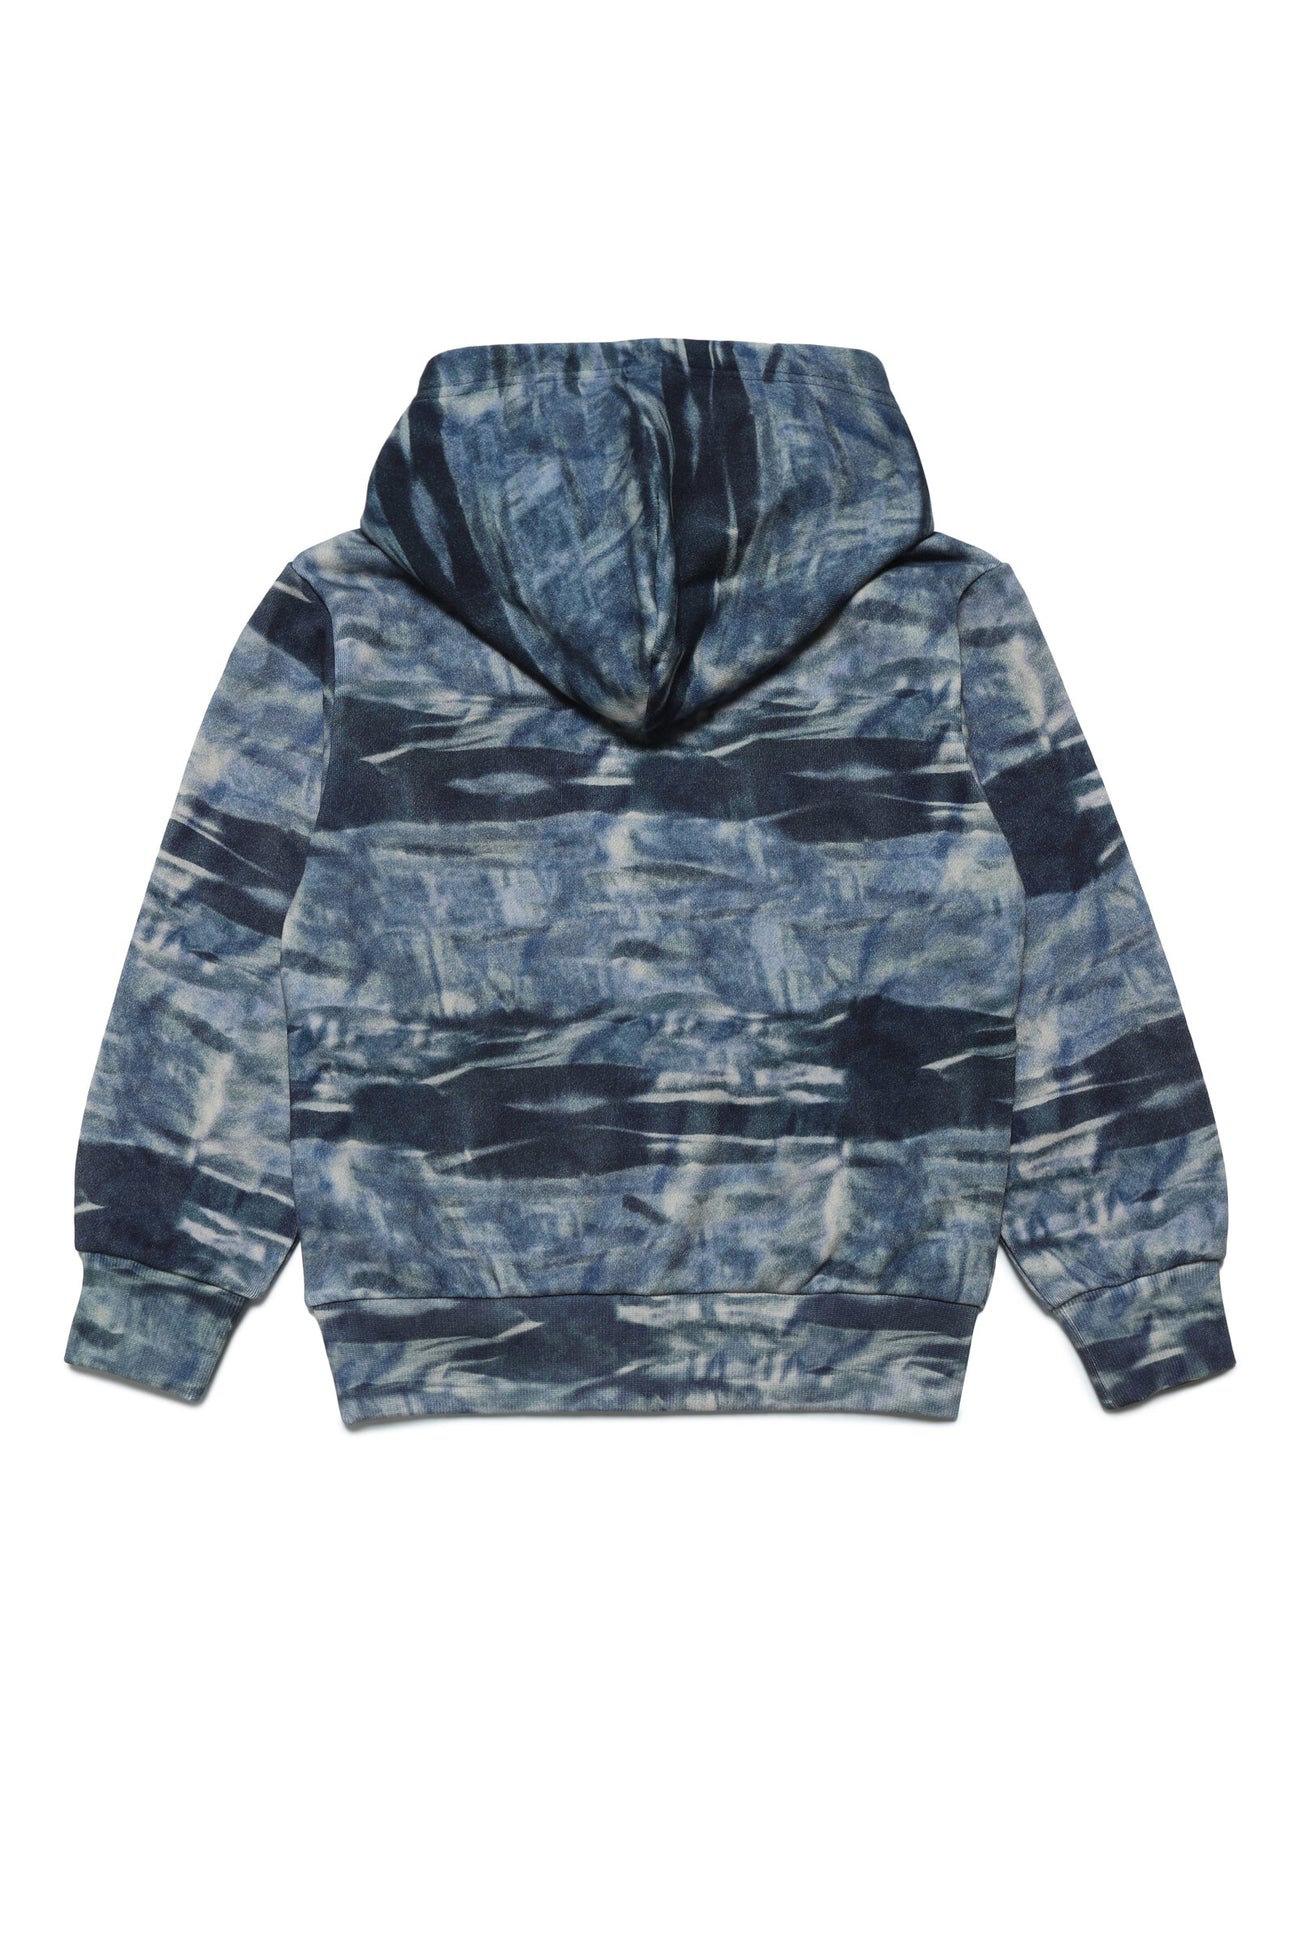 Hooded cotton sweatshirt with allover camouflage pattern and lettering Hooded cotton sweatshirt with allover camouflage pattern and lettering